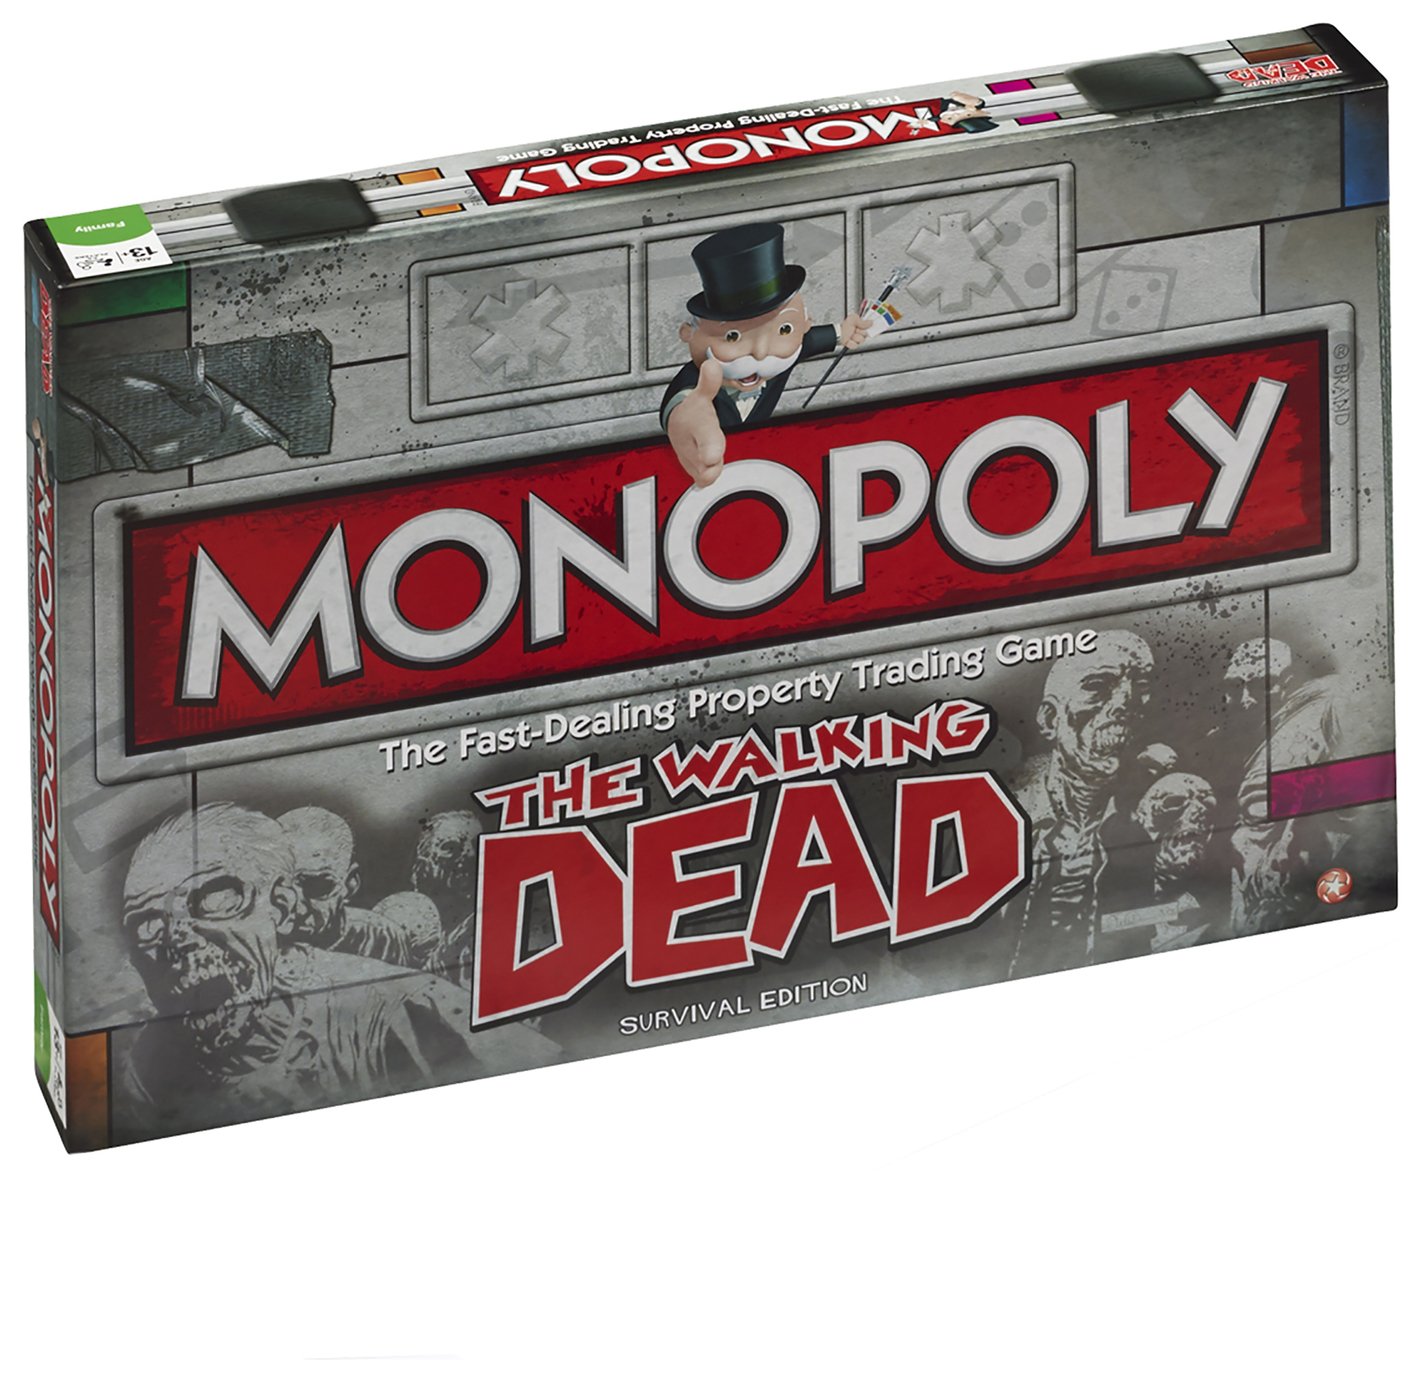 The Walking Dead Survival Edition Monopoly Board Game